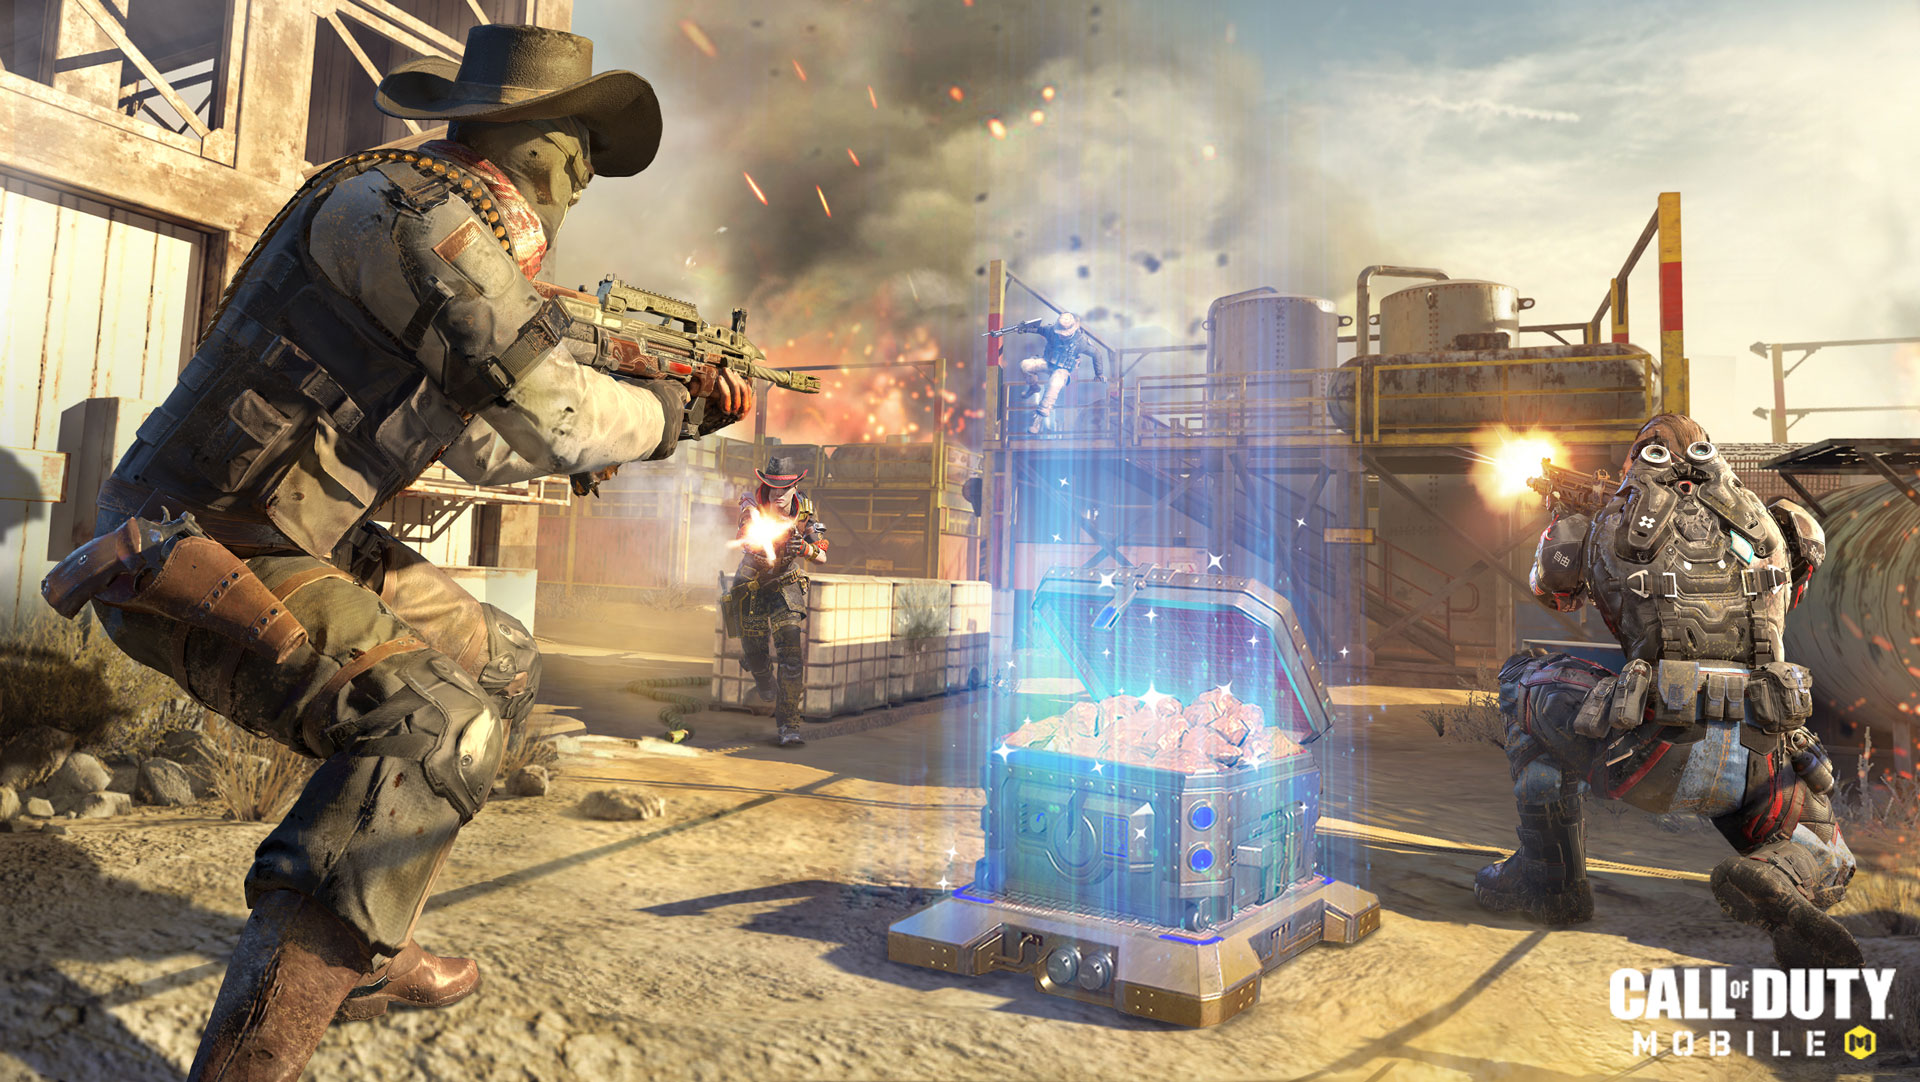 Call of Duty' maker Activision Blizzard to pay $35 mln over U.S.